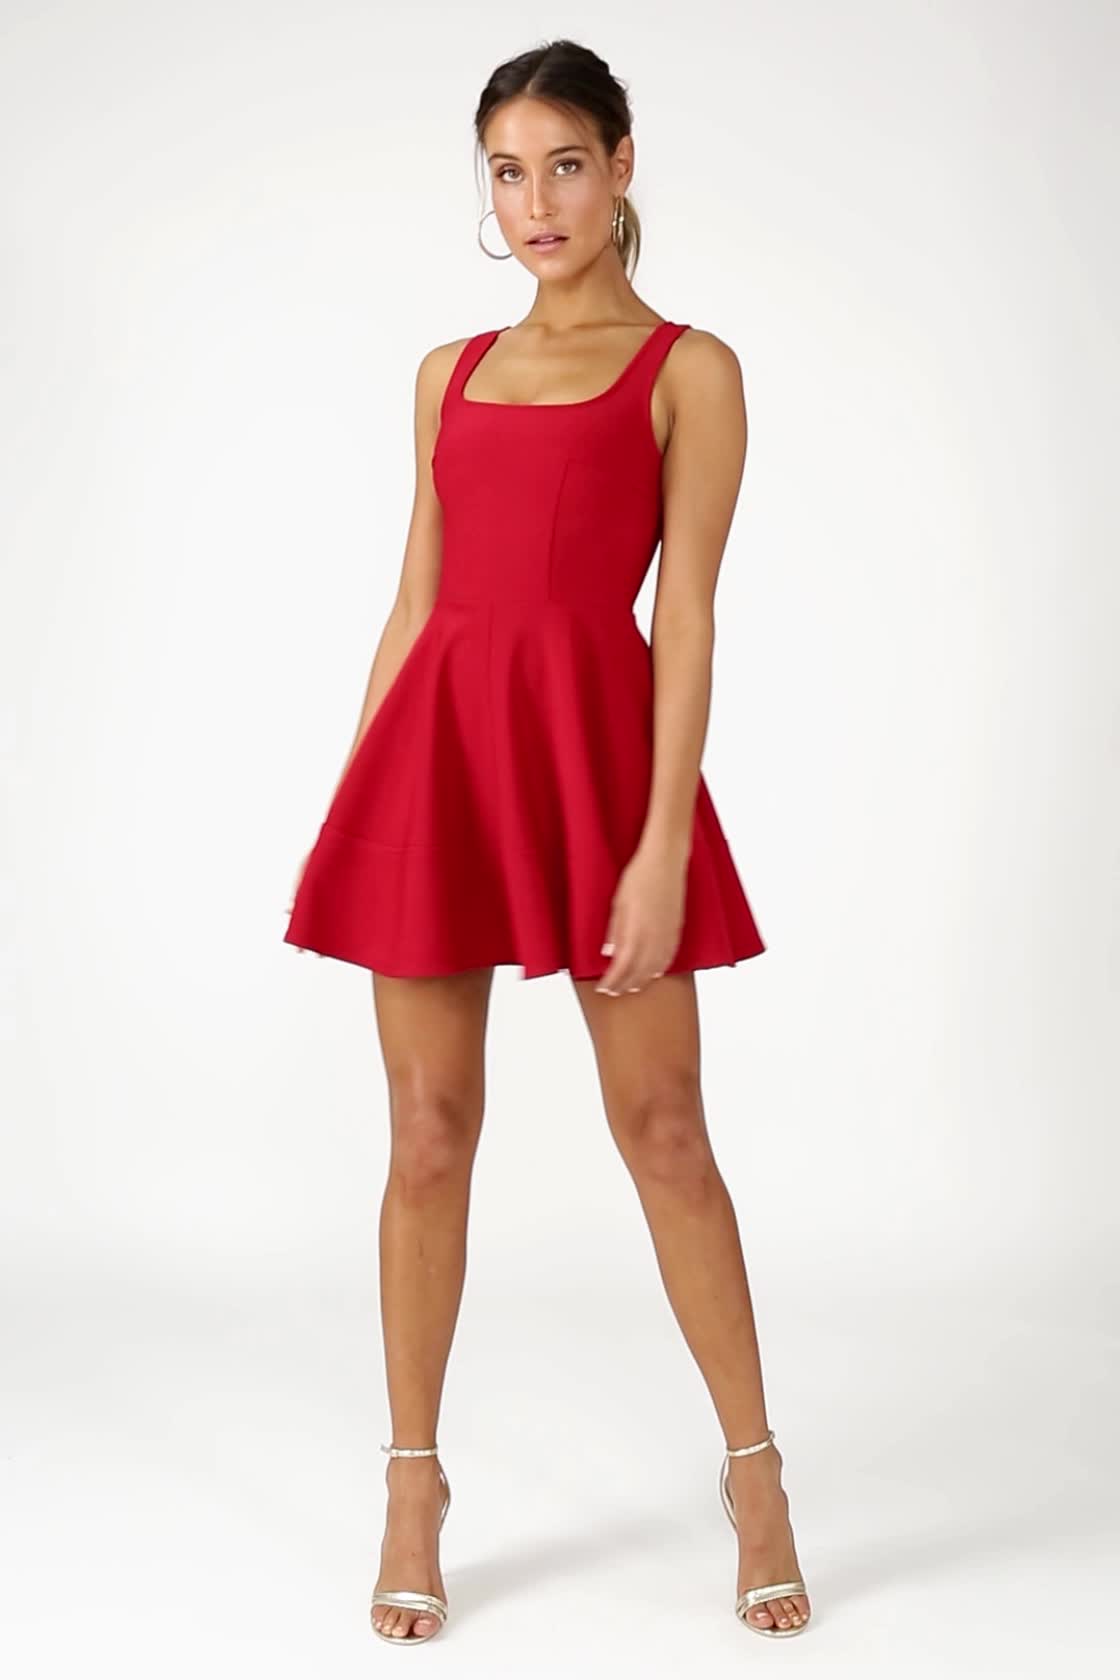 Buy > party dress red > in stock